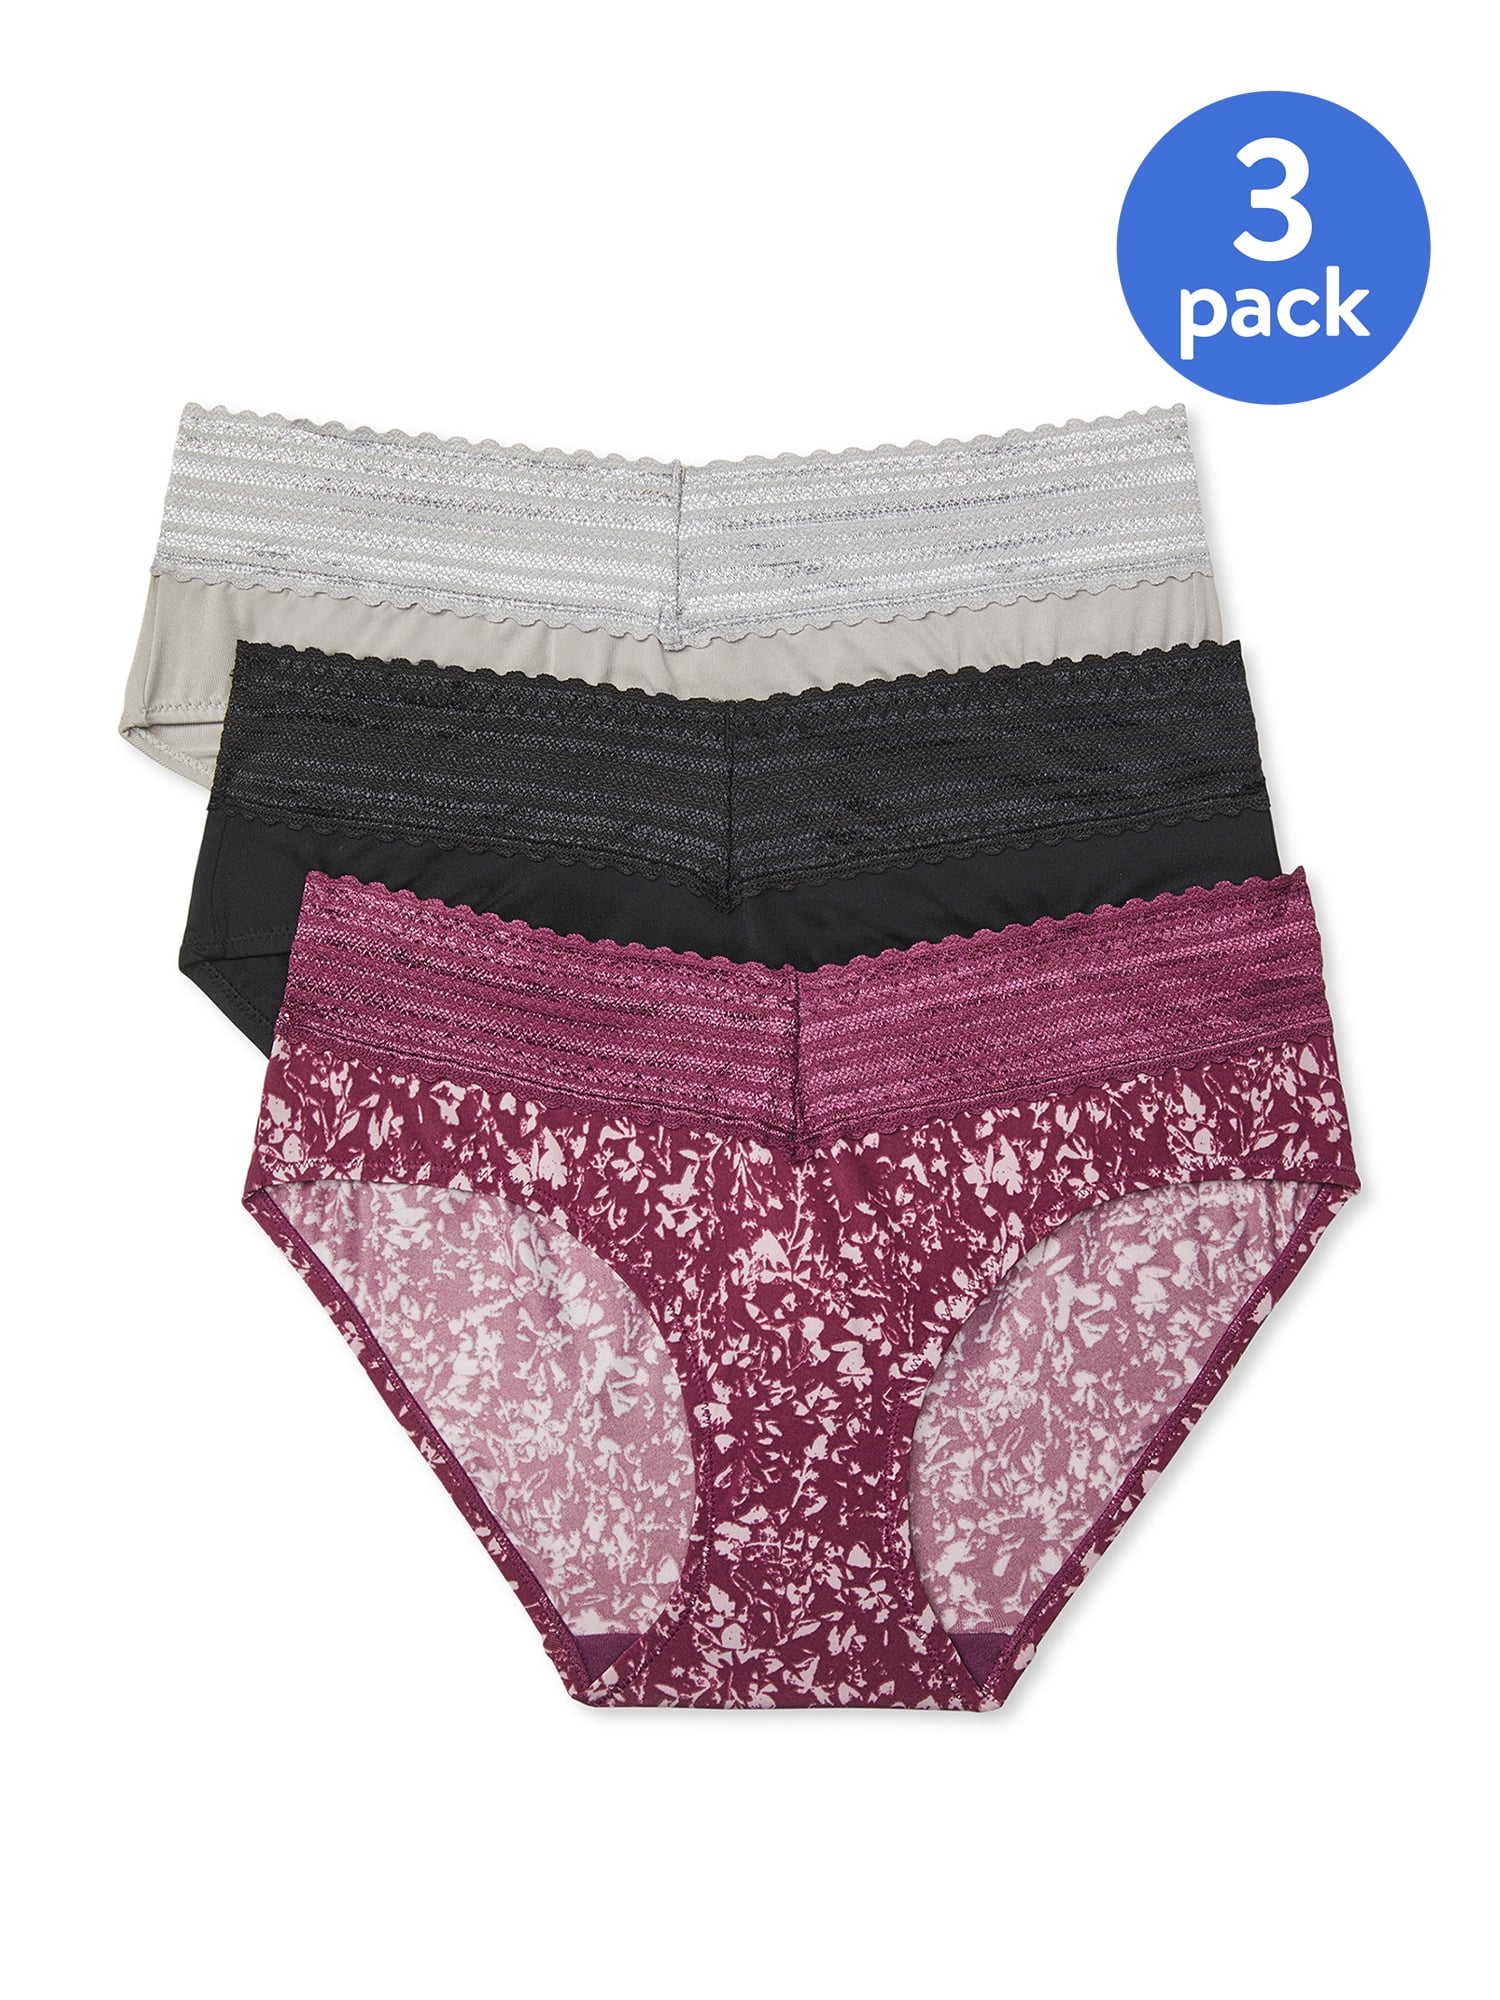 Warners Blissful Benefits Dig-Free Microfiber Lace Hipster 3-Pack RU1793W